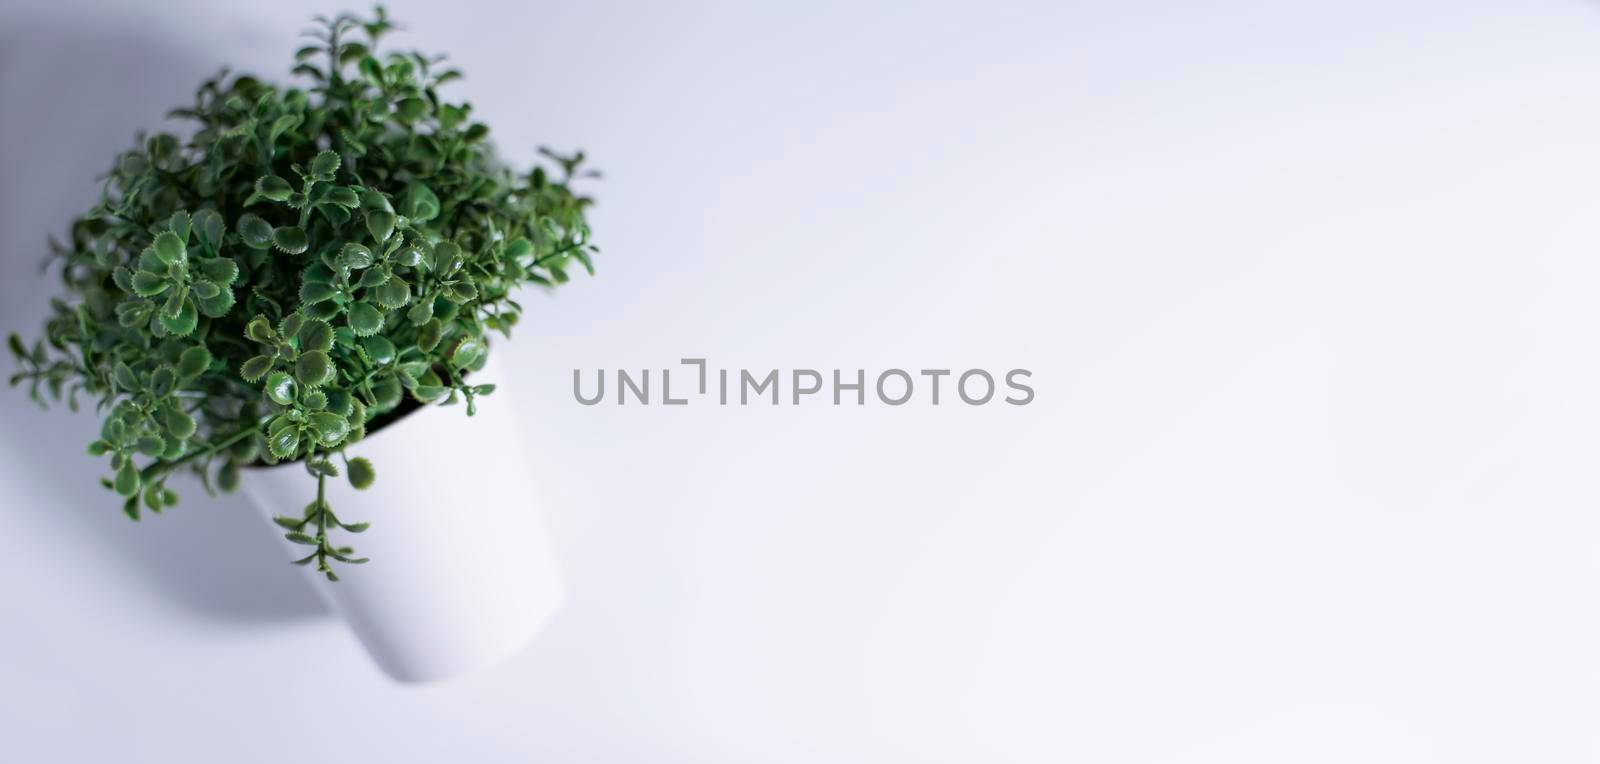 advertising concept with green succulent plant in pot on white and gray background with copy space, side view by Matiunina